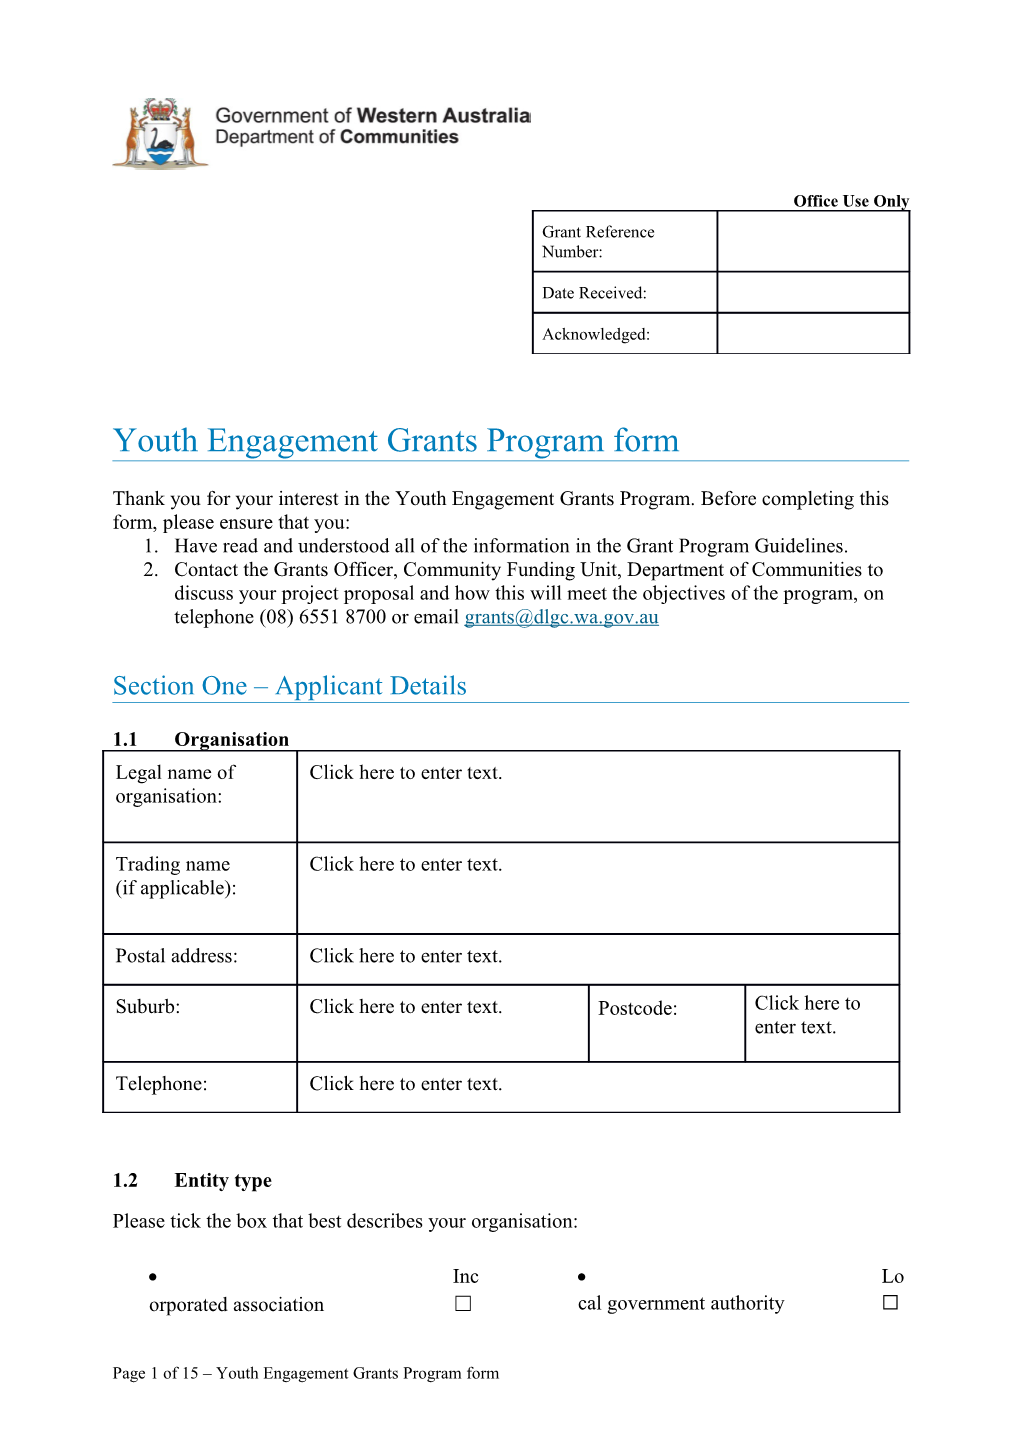 Youth Engagement Grant Program Application Form